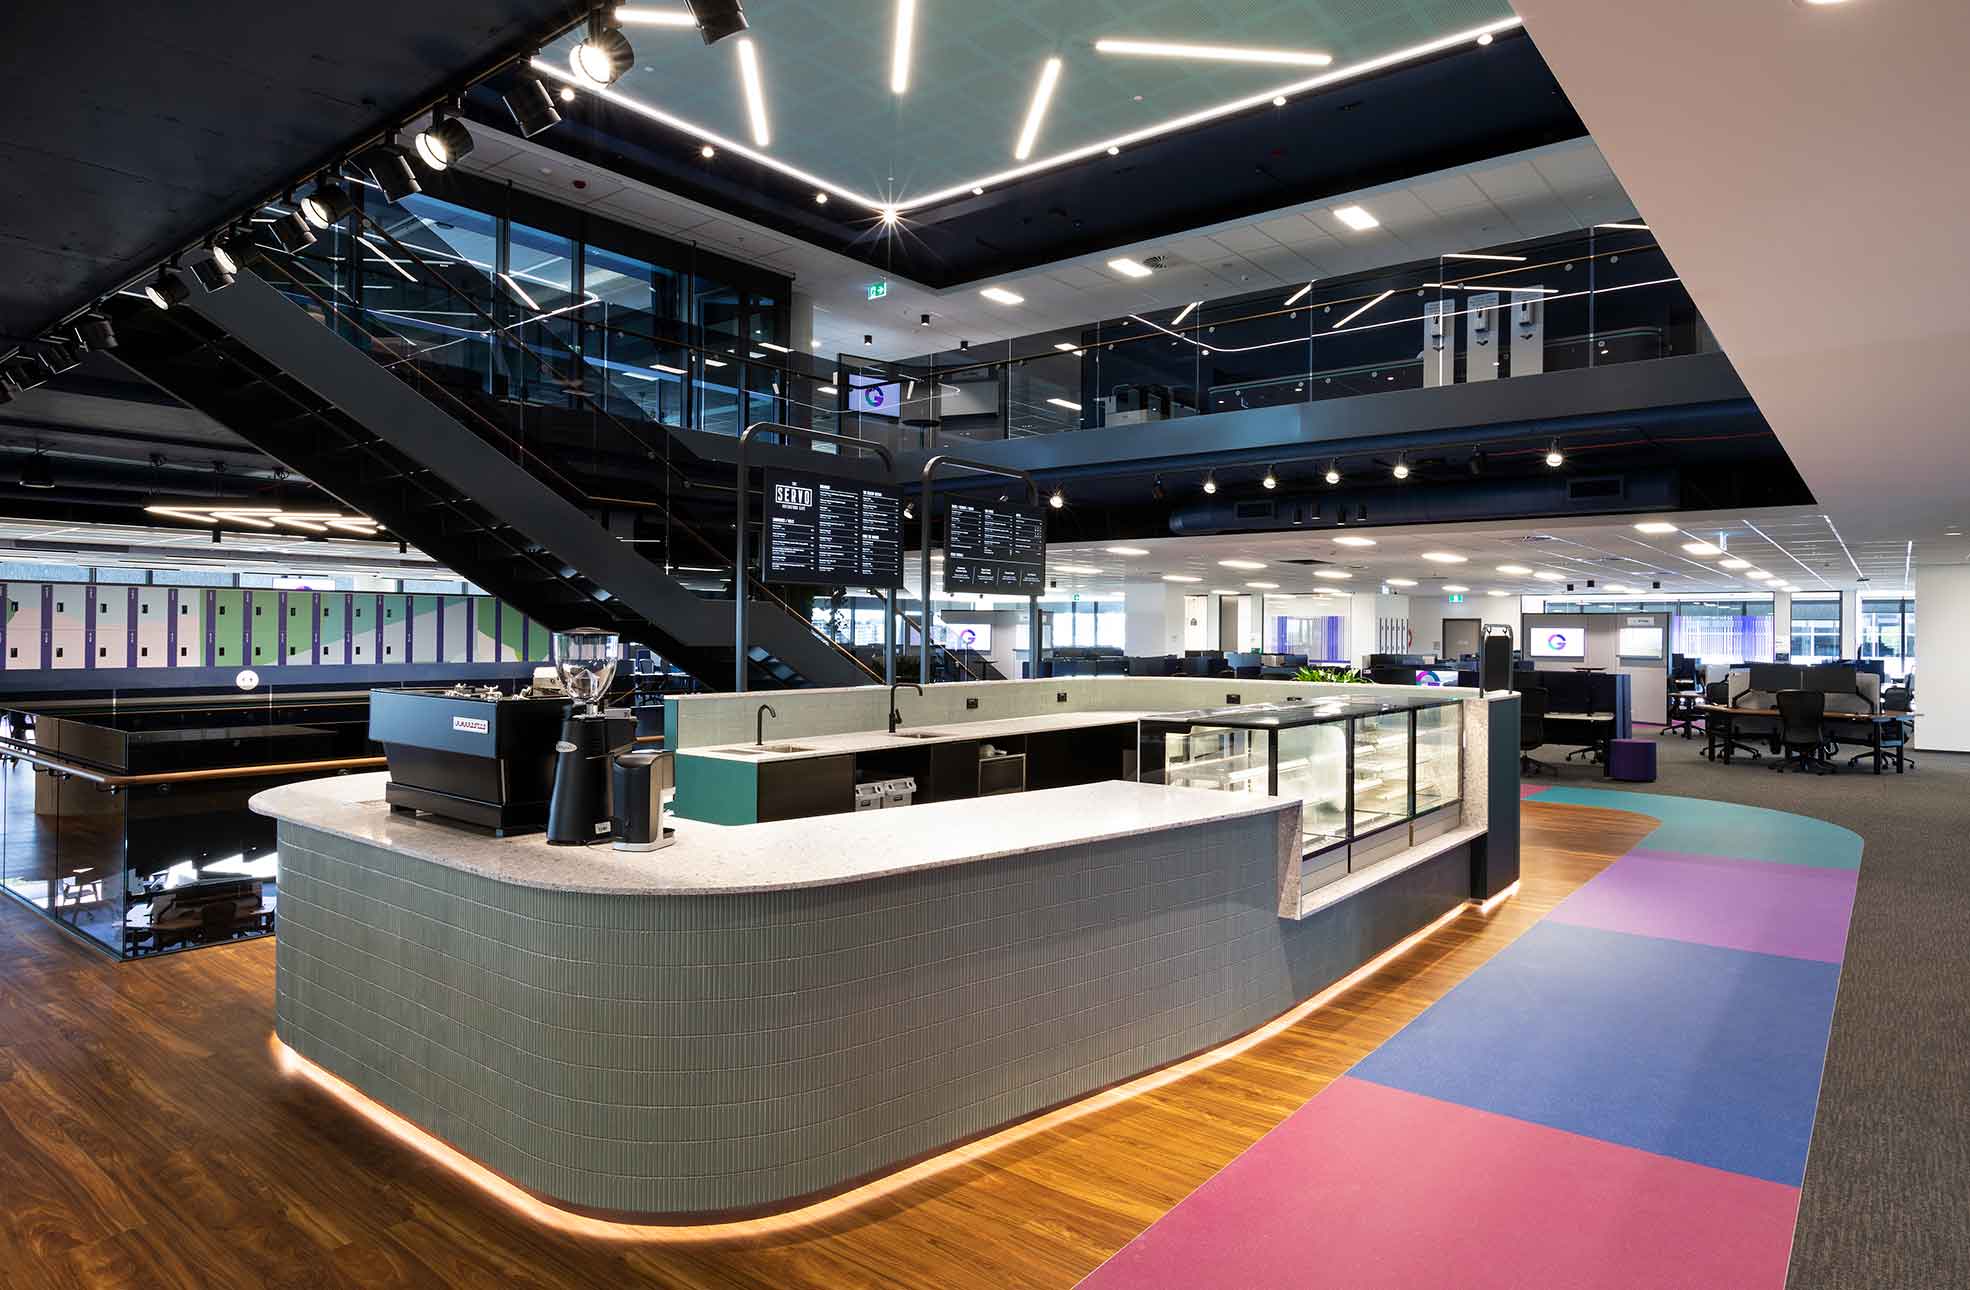 Office fitout with kitchen, coffee machine, stairs to upper floor & workstations in background